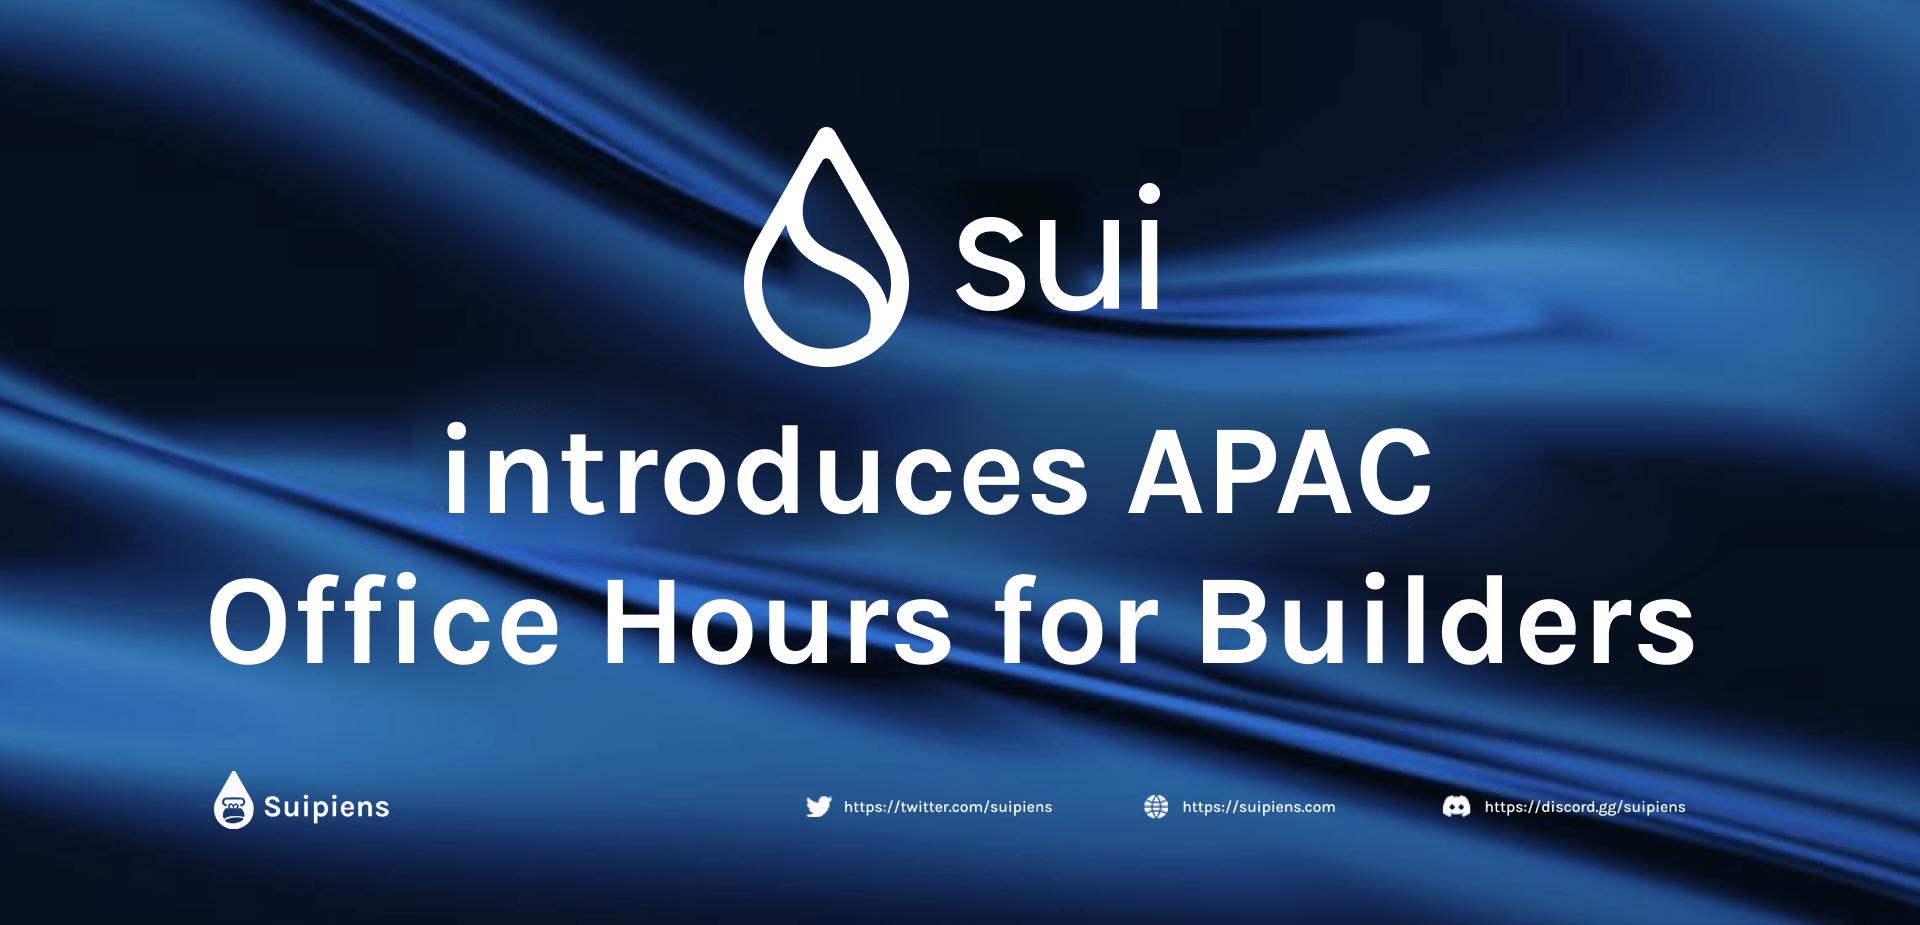 Sui introduces APAC Office Hours for Builders